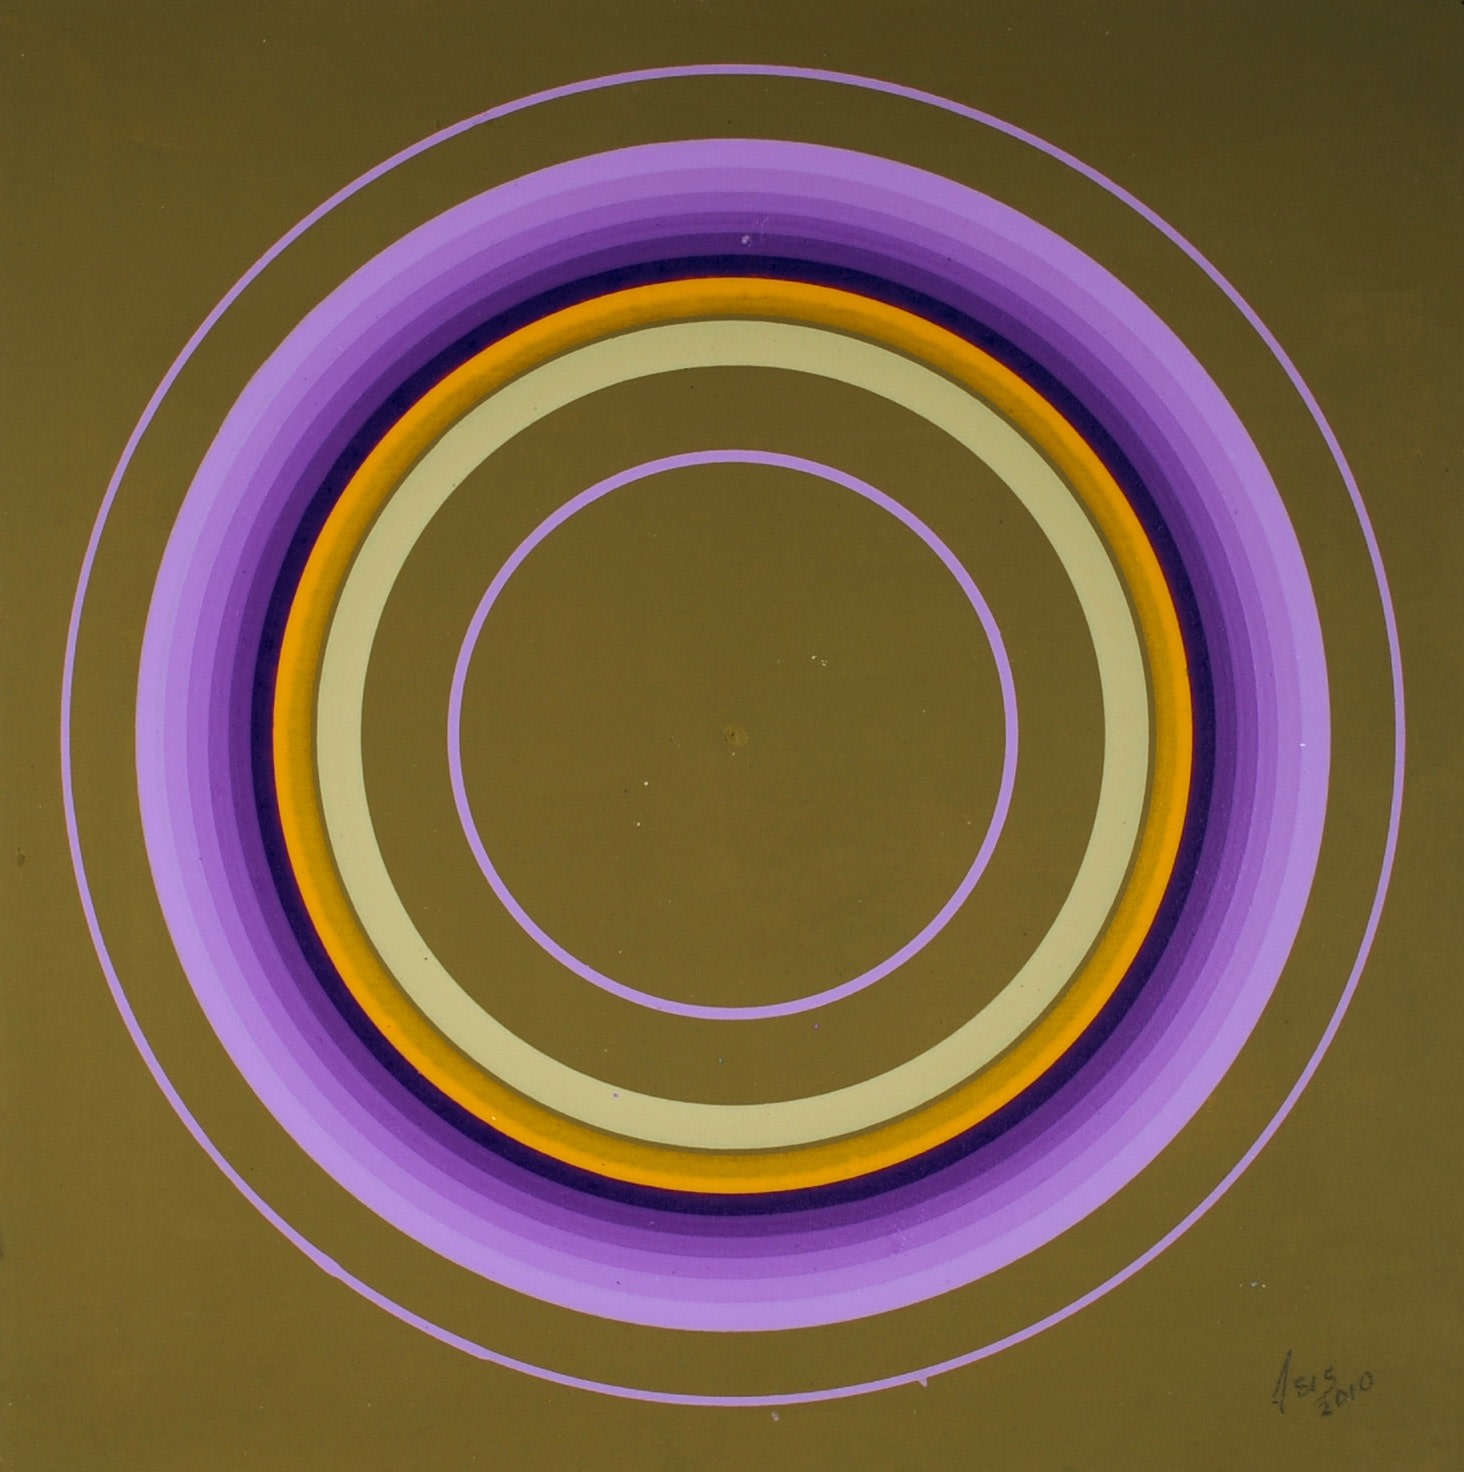 Antonio Asis,&nbsp;Untitled from the series Cercles Concentriques, 2010, Gouache on cardboard,&nbsp;7 1/2 x 7 1/2 in. (19.1 x 19.1 cm.)